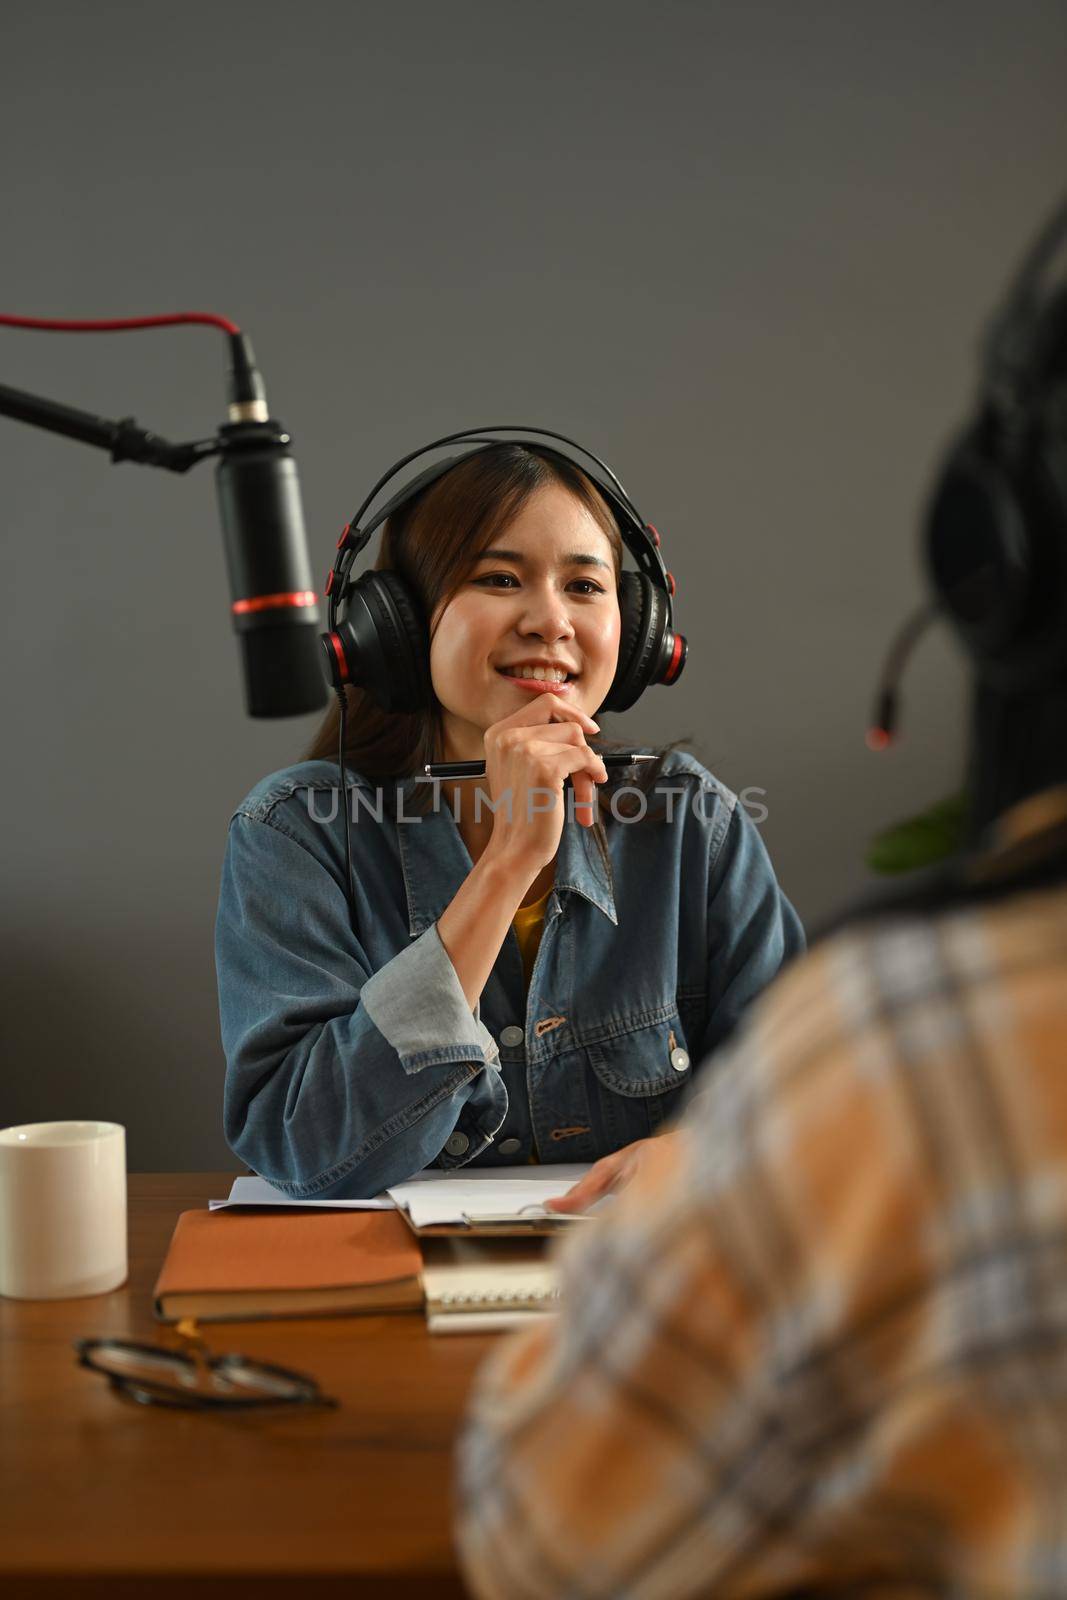 Friendly radio host in headphone discussing various topics with her guest while streaming live audio podcast from home studio by prathanchorruangsak